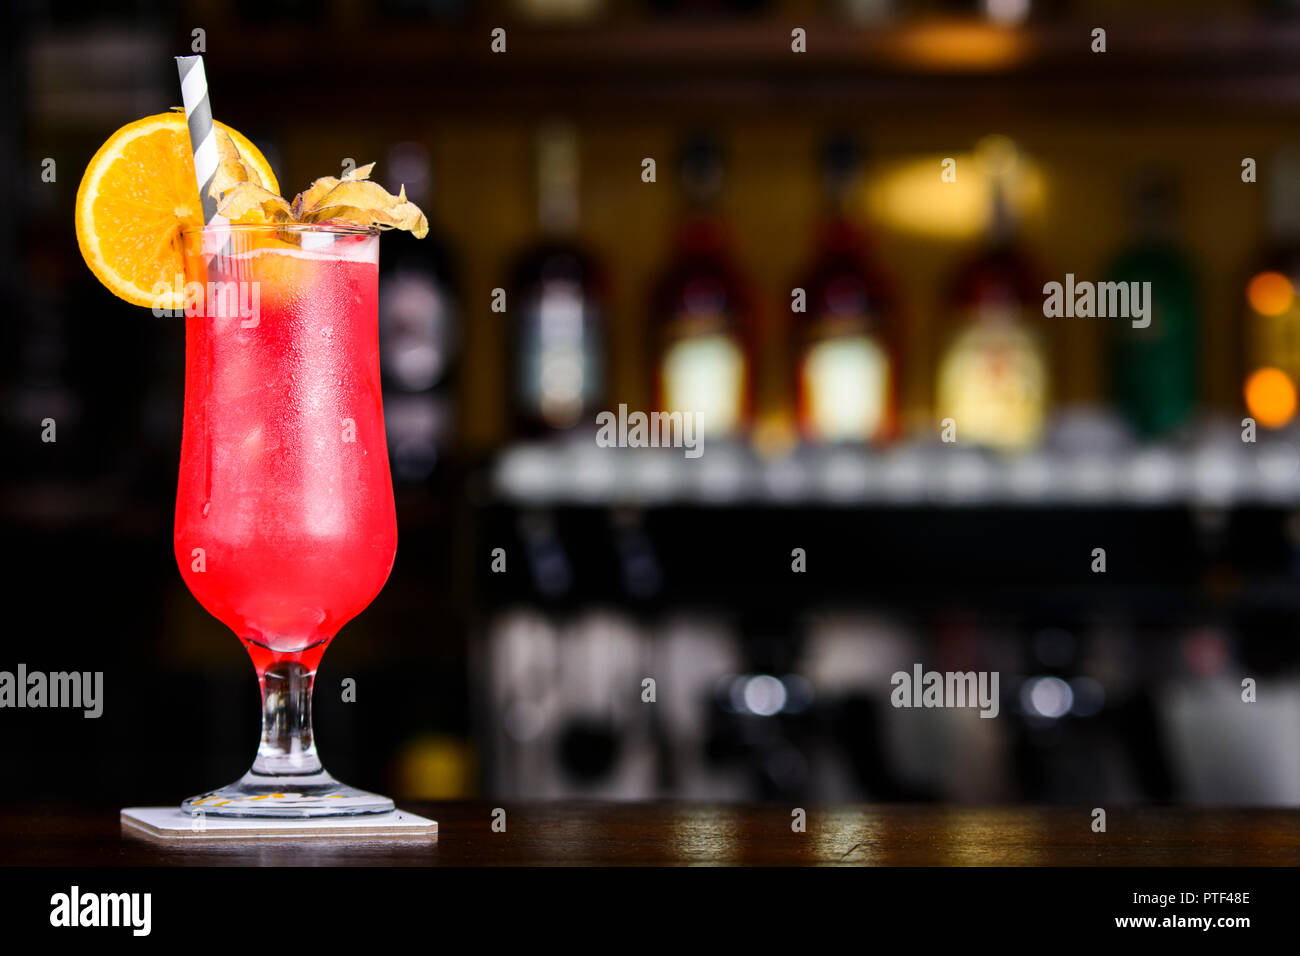 Strawberry Colada. Red decorated cocktail on the bar table. Stock Photo